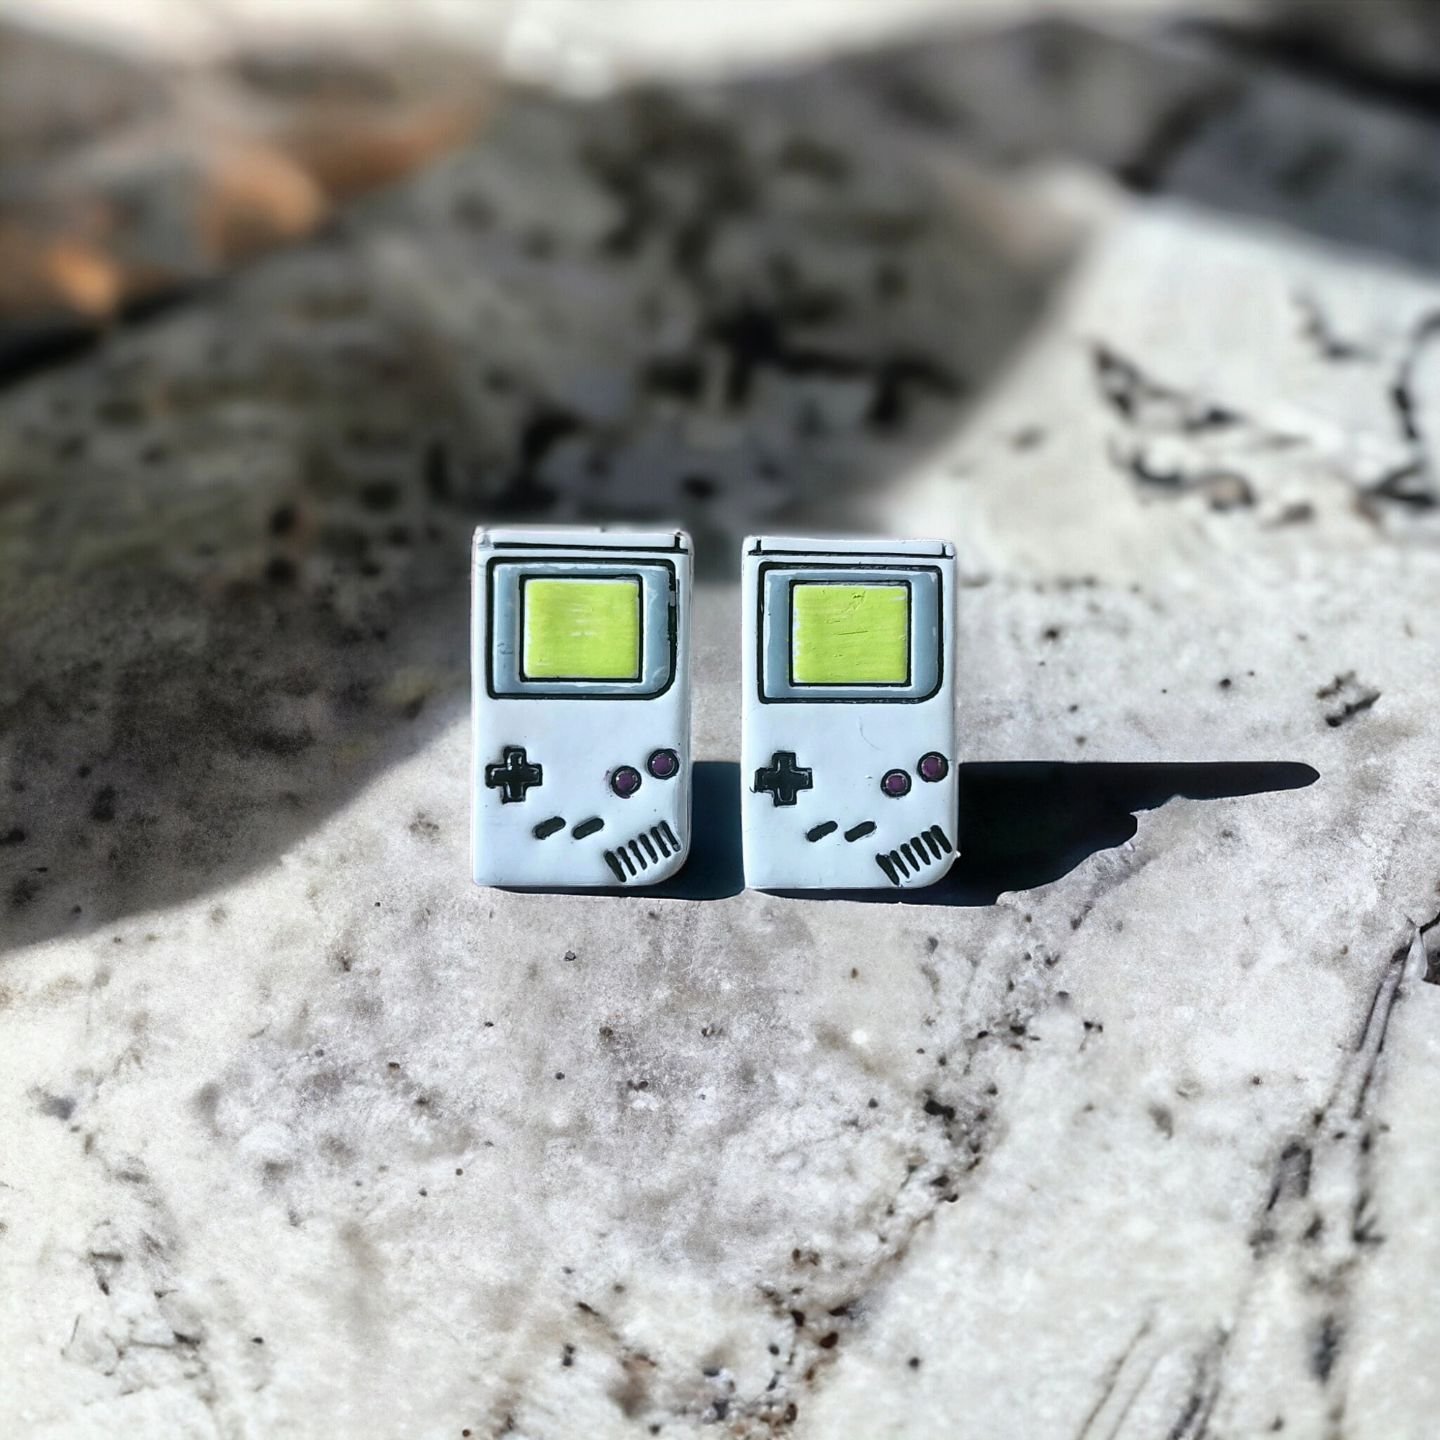 These little gameboys are going to make some awesome dangles. I'll have these with me this Saturday at the @southendvintagemarket. 
.
 #terripowerart #handmade  #instaartist #wearableart #polymerclay #clayearrings  #downtowndartmouth #handmadejewelry